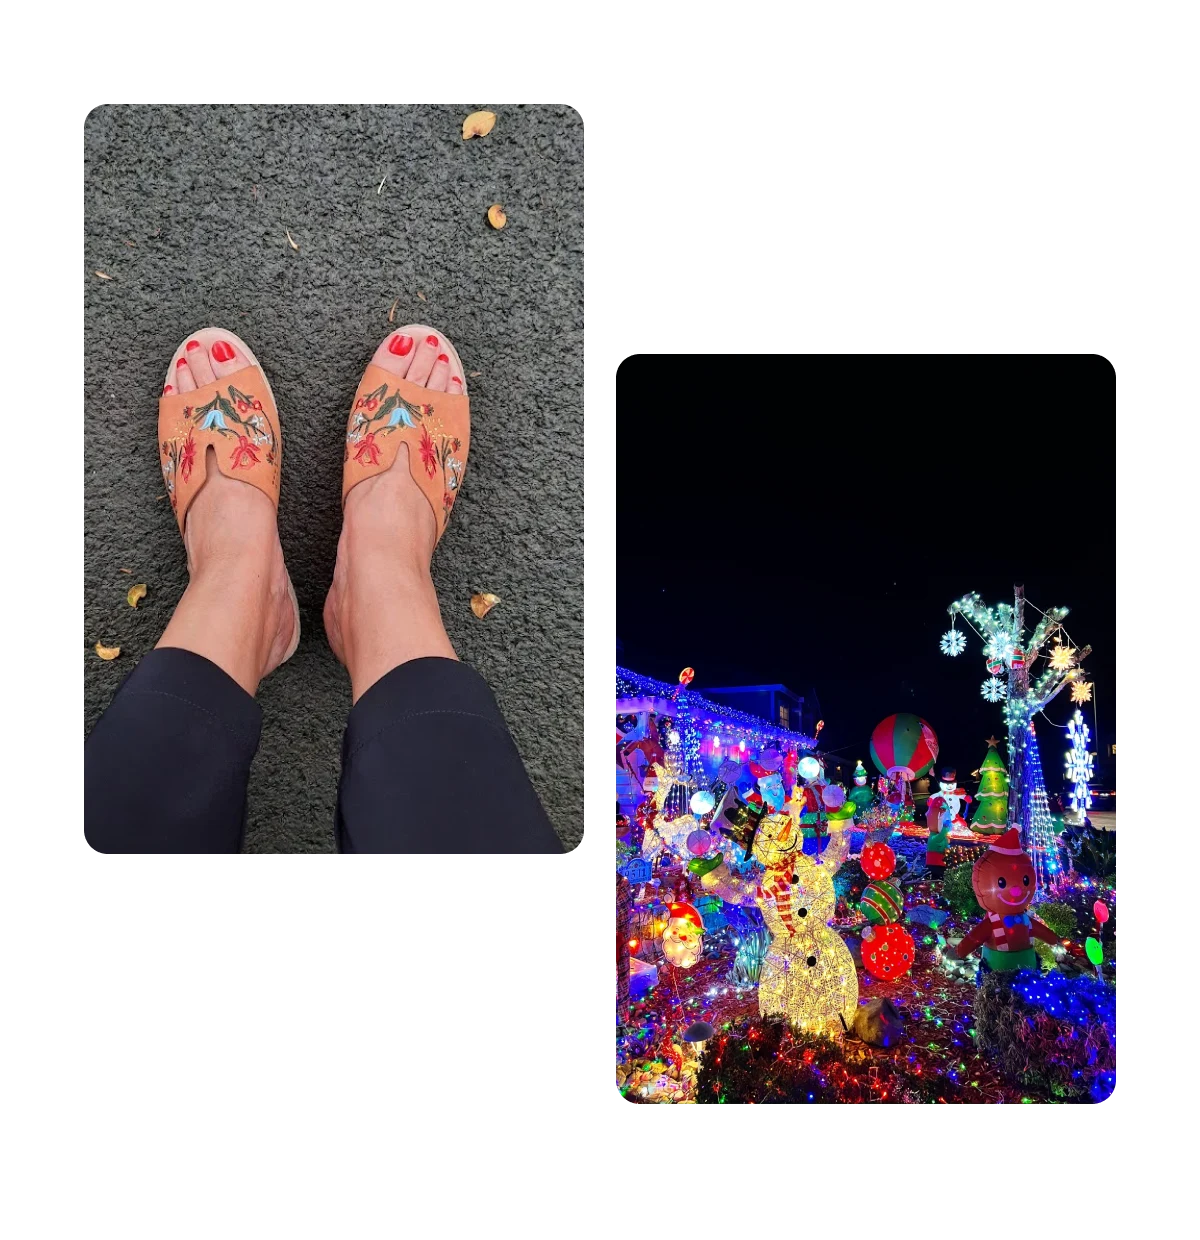 Two pins, holiday shoes, outdoor holiday decorations 